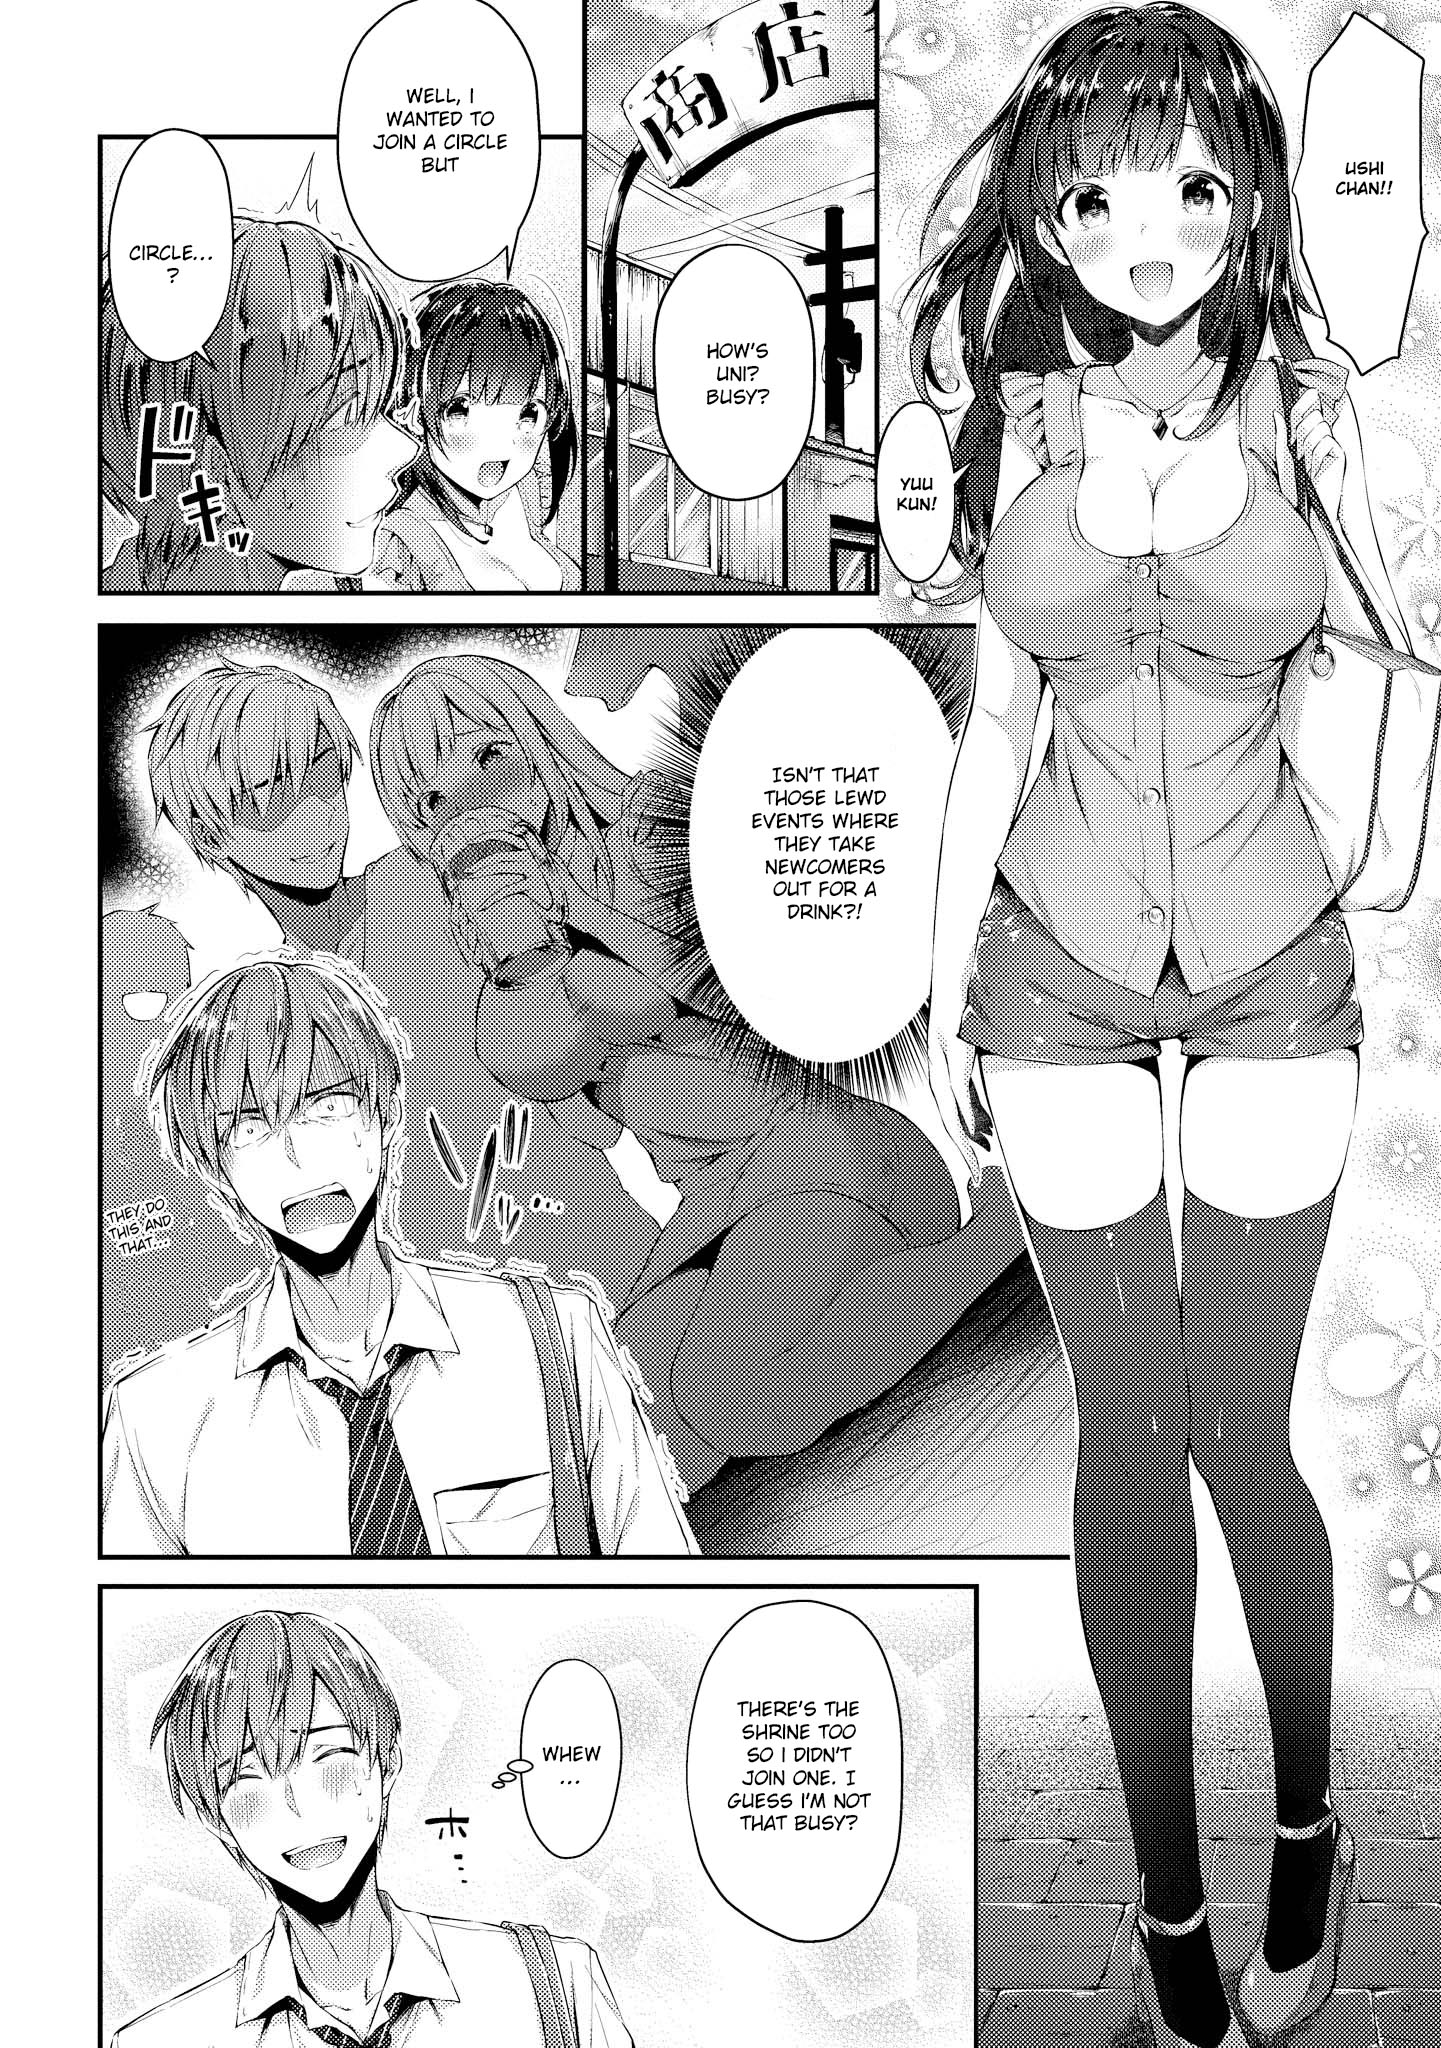 Do You Like Fluffy Boobs? Busty Girl Anthology Comic Chapter 4: Ushi Chan's Good Luck Charm ~Shopping District Lottery~ - Picture 3